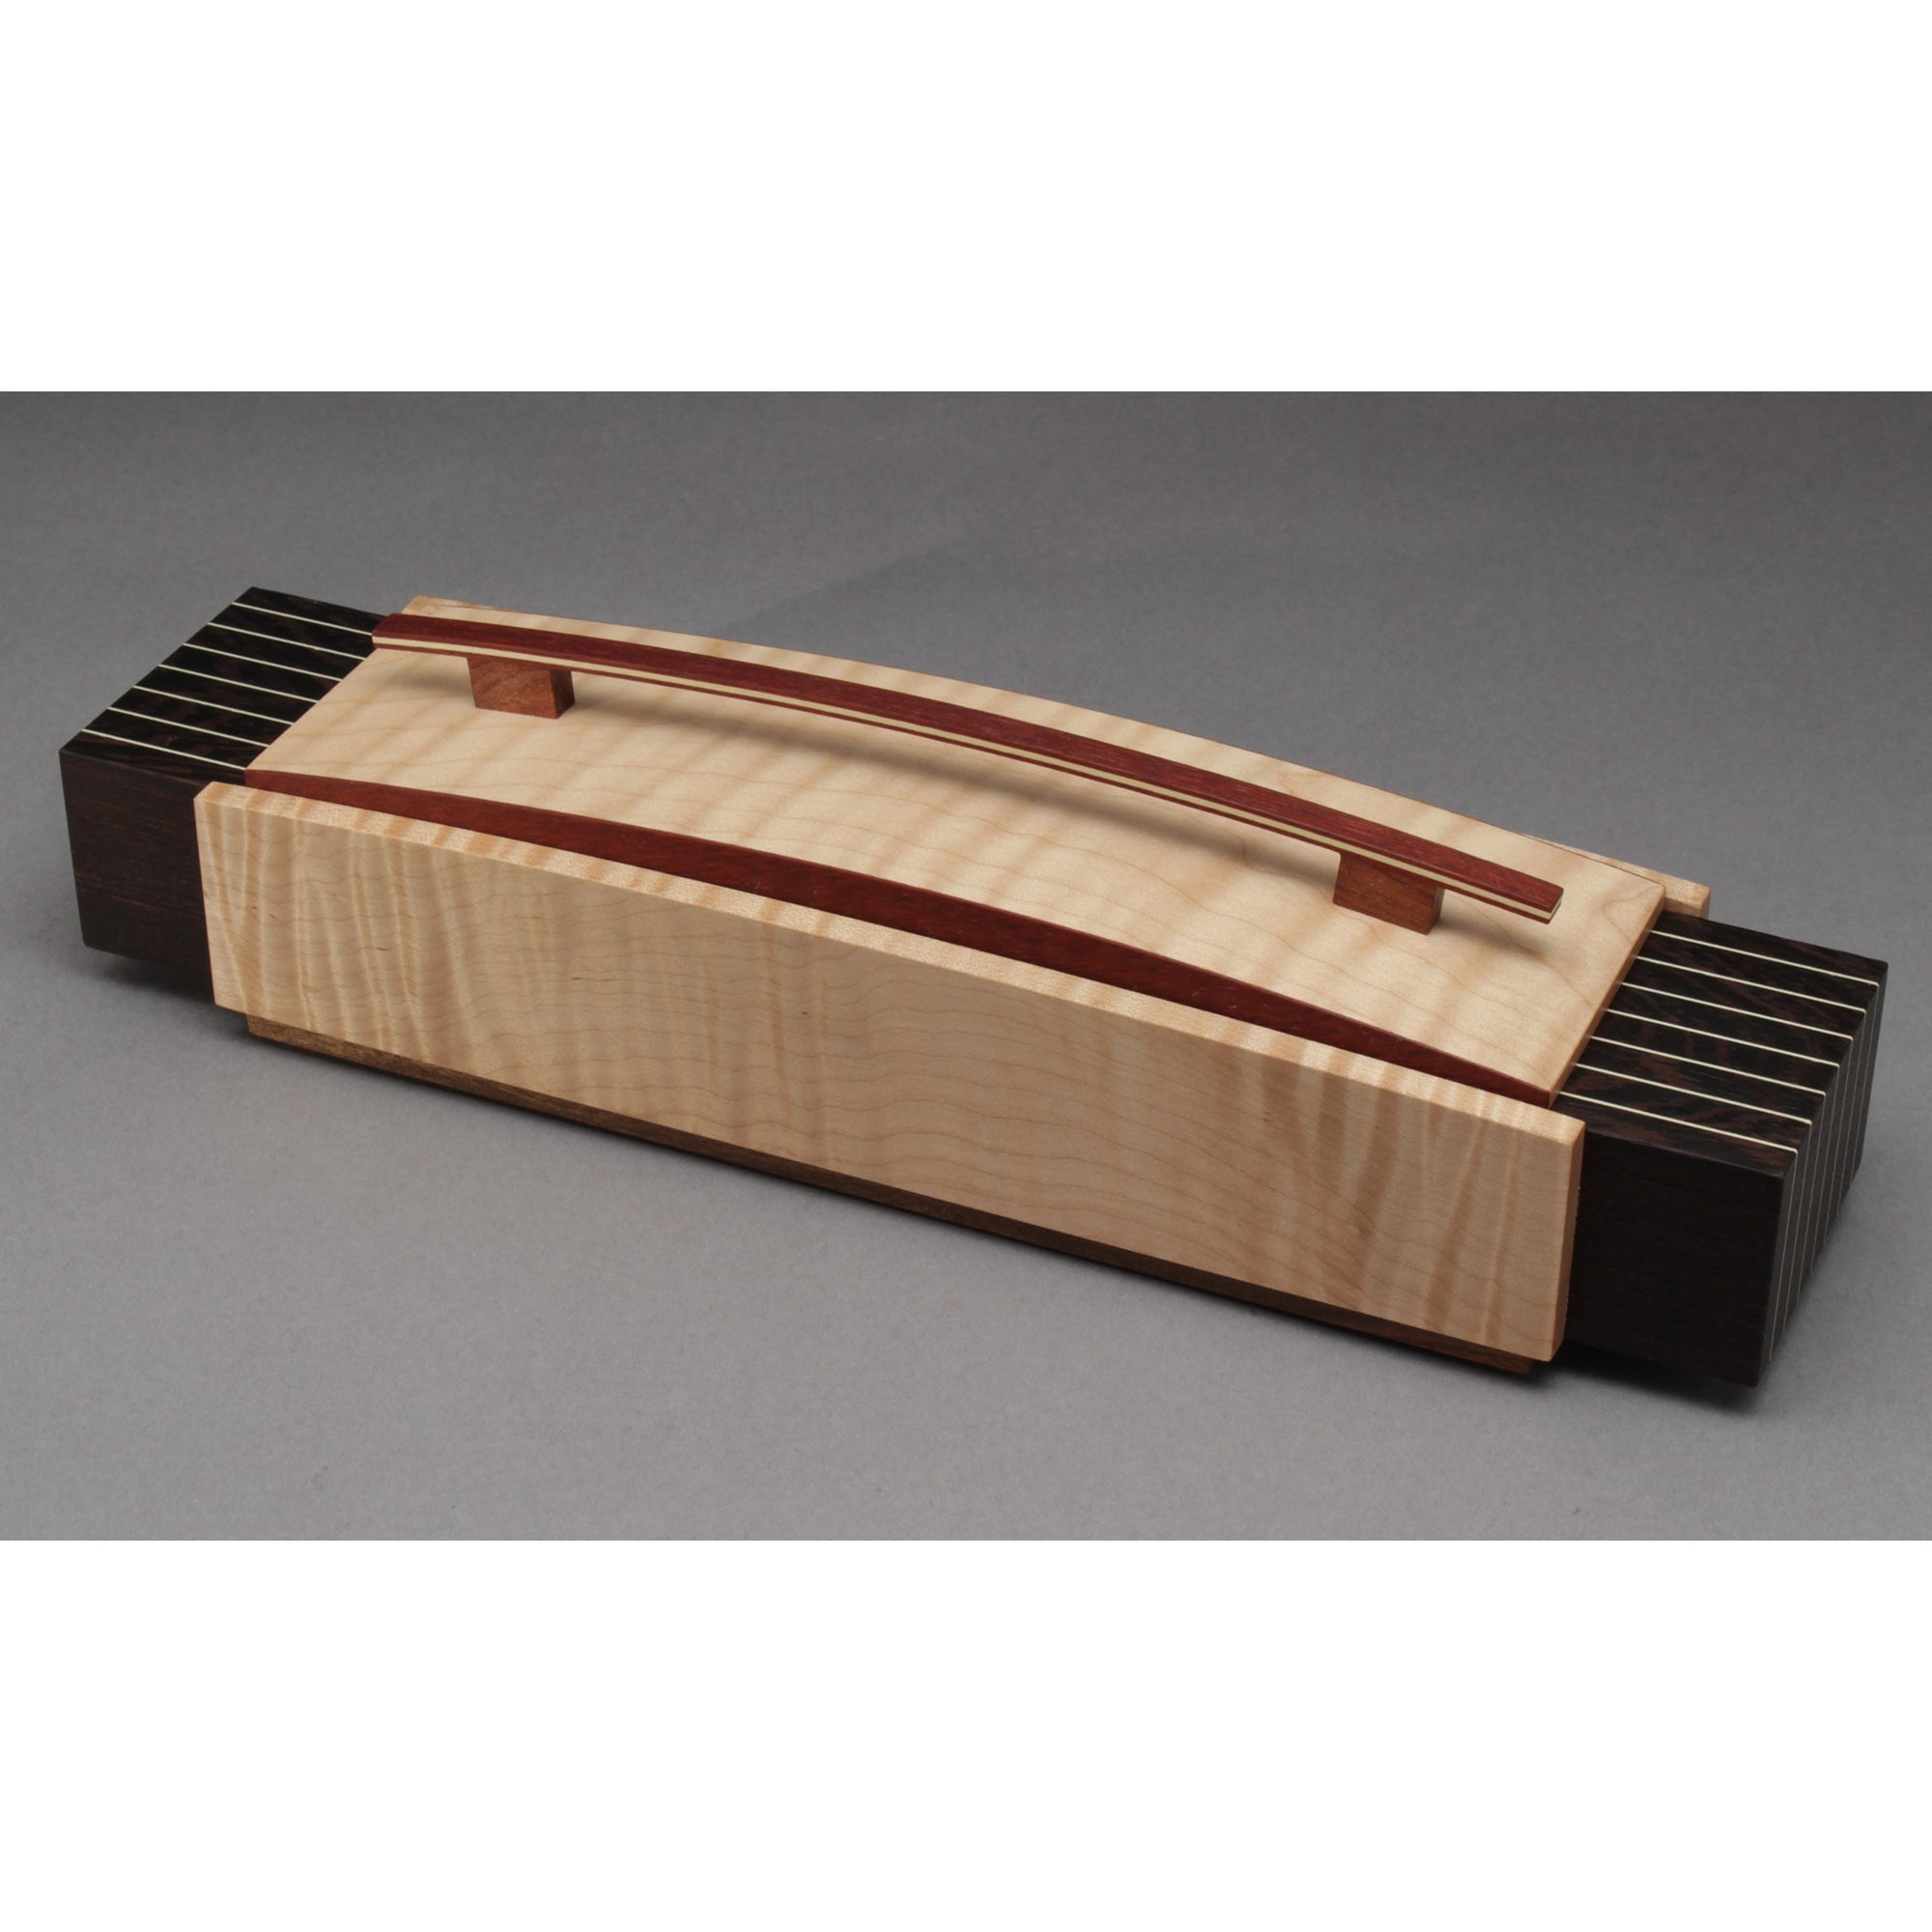 Exotic Woods Box- Gentle Arc | Getty Store